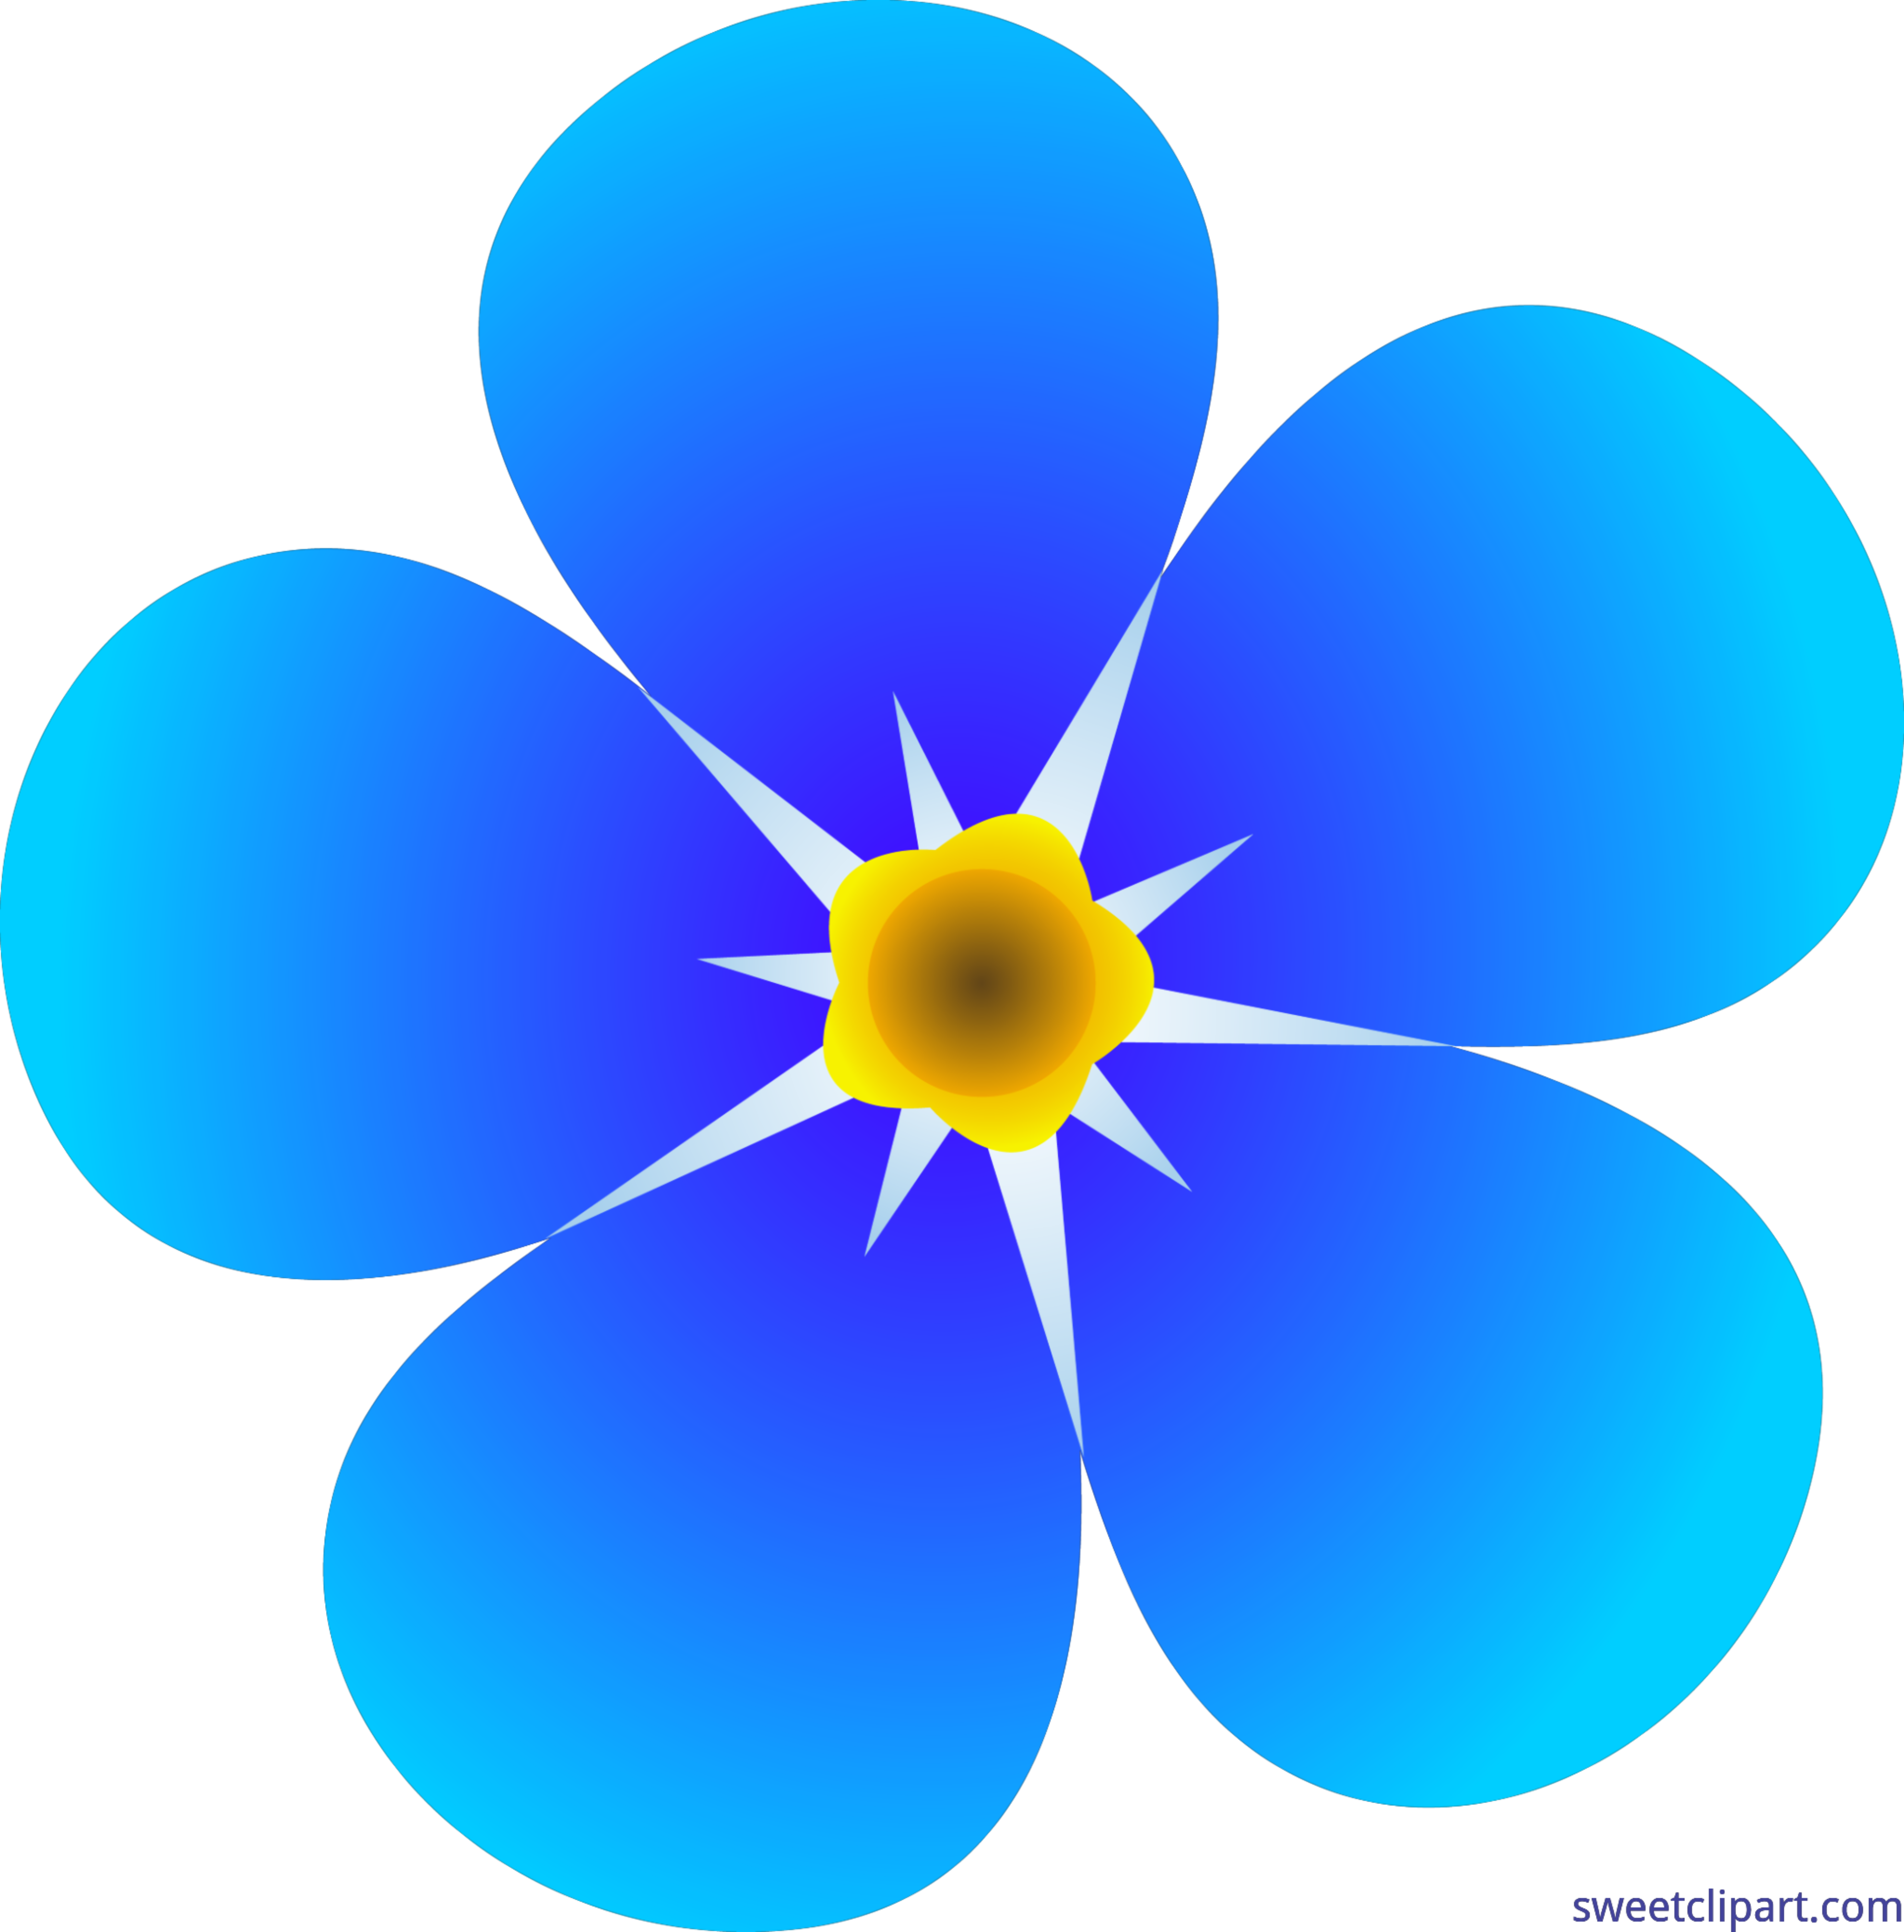 Single forget me not. Flower clip art png